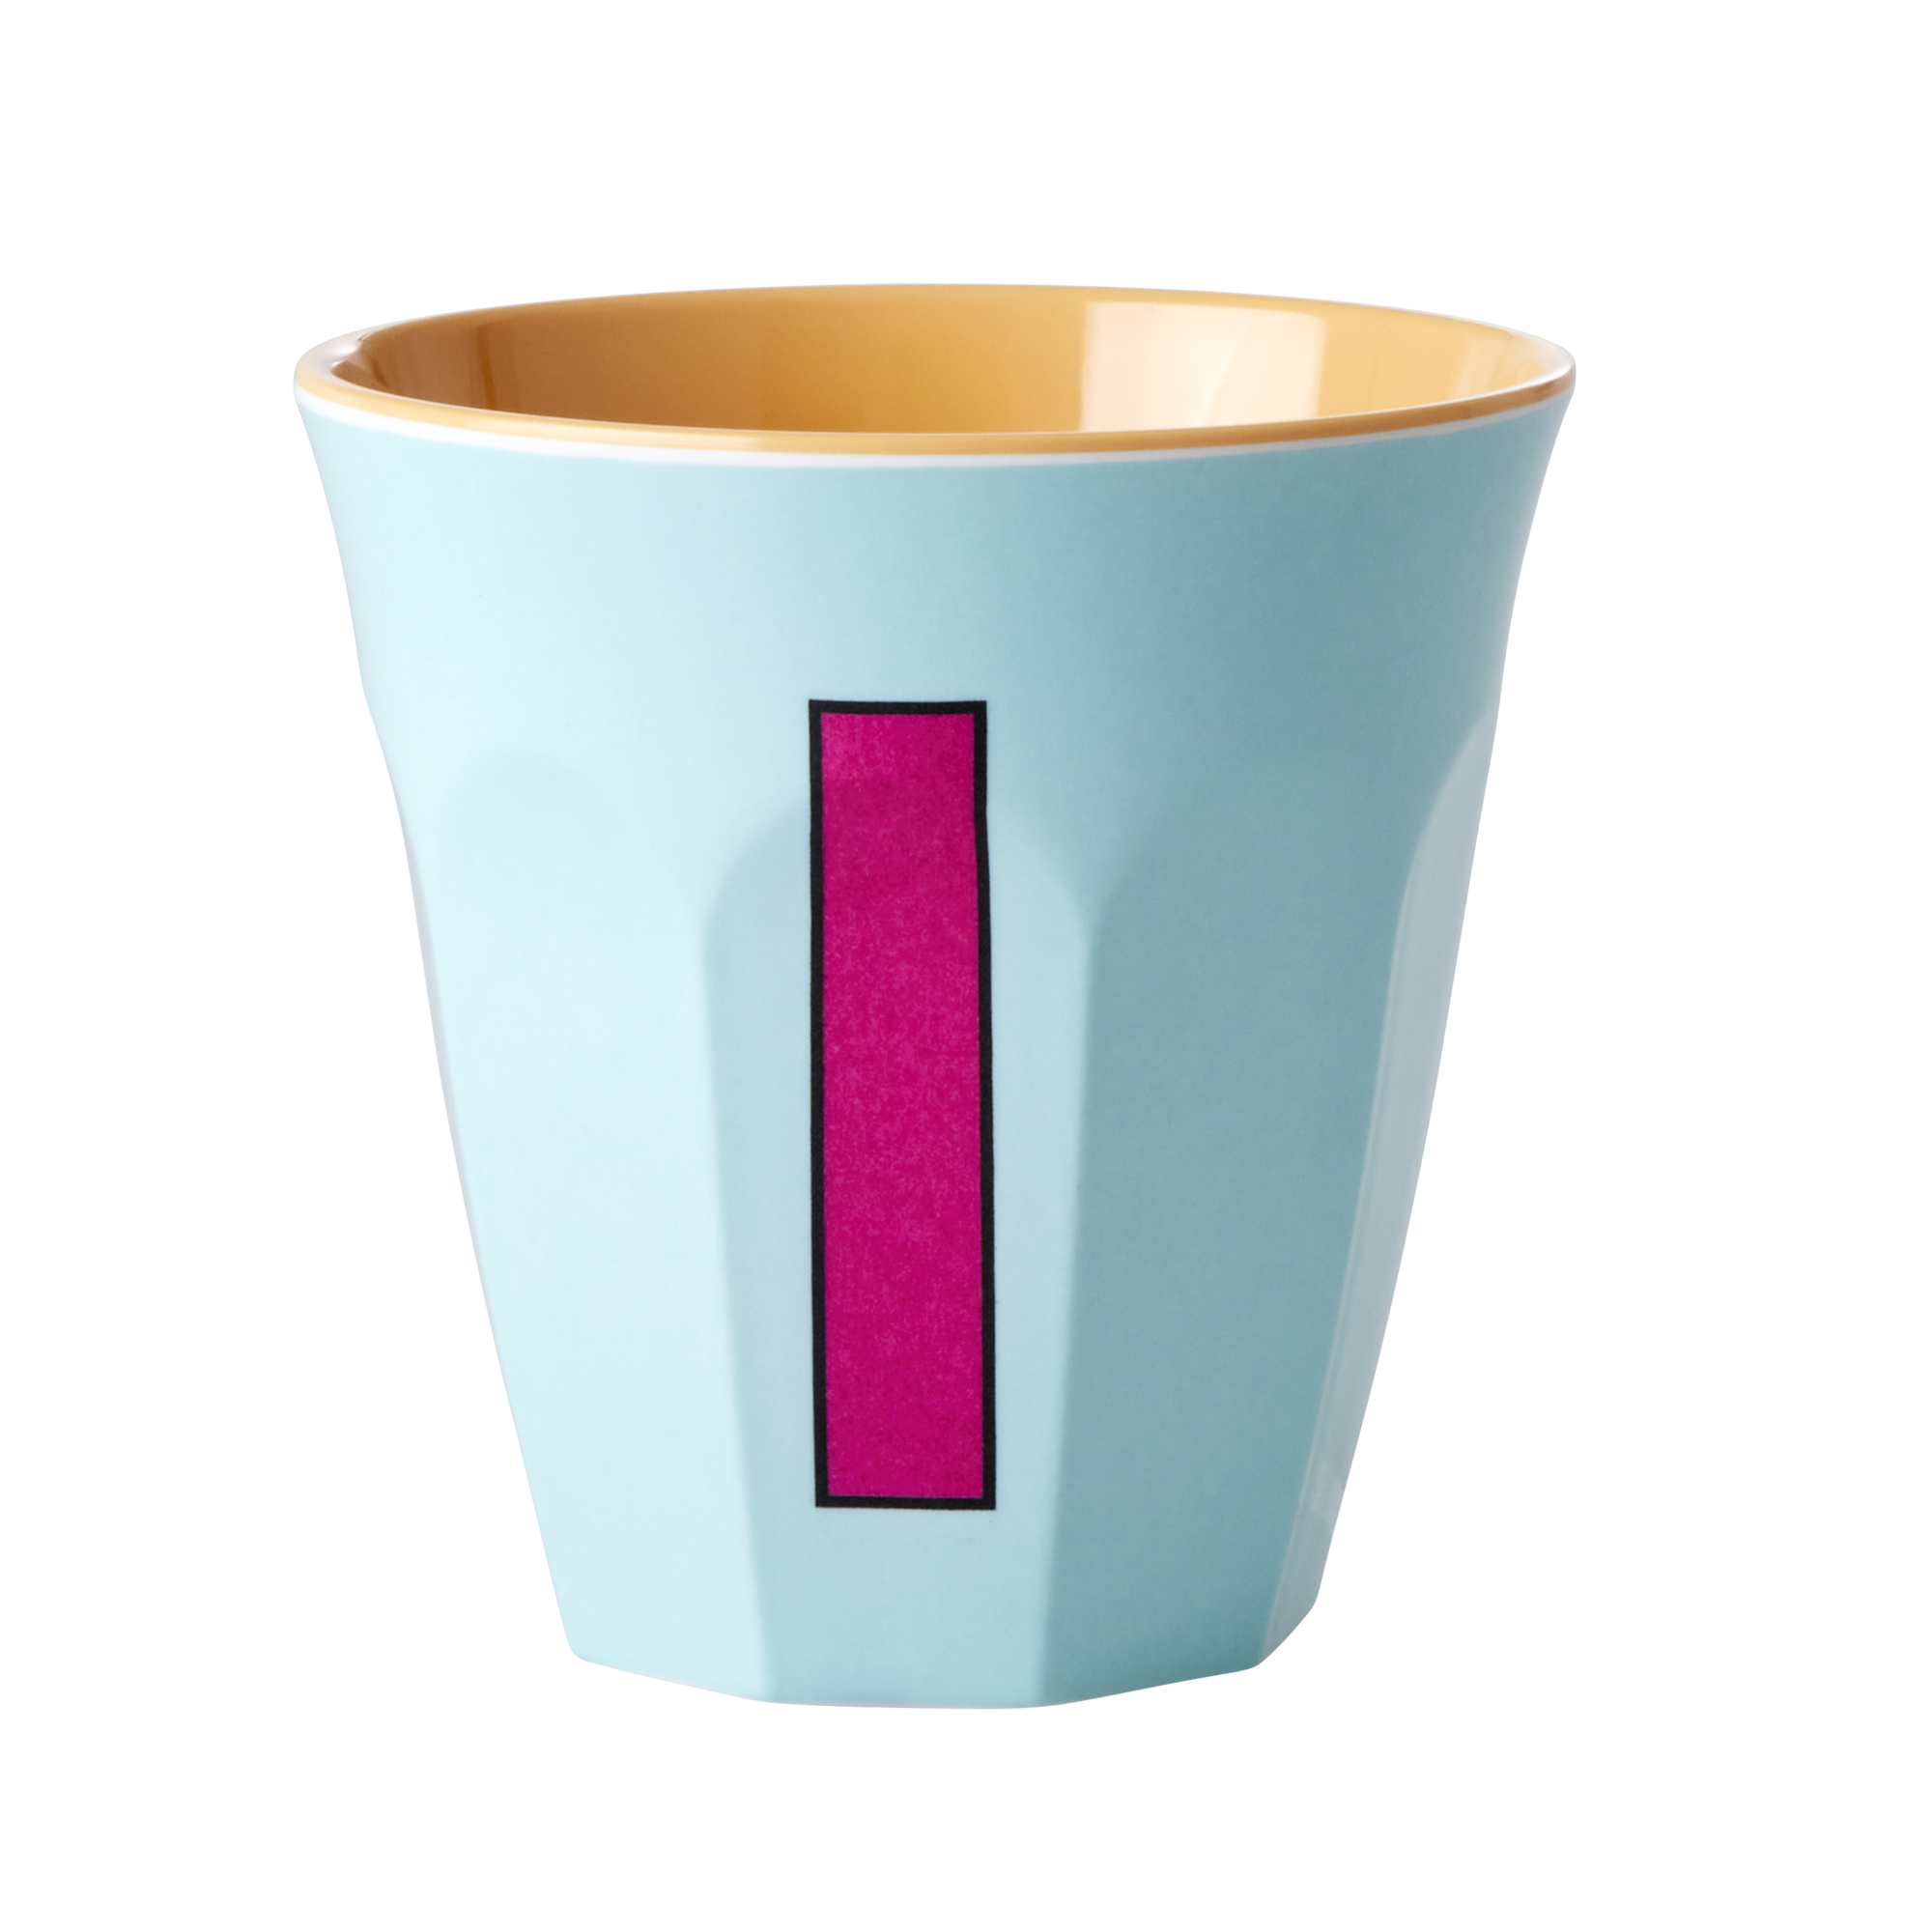 Melamine cup by Rice by Rice in the colors light blue, red, and yellow with the letter "I"